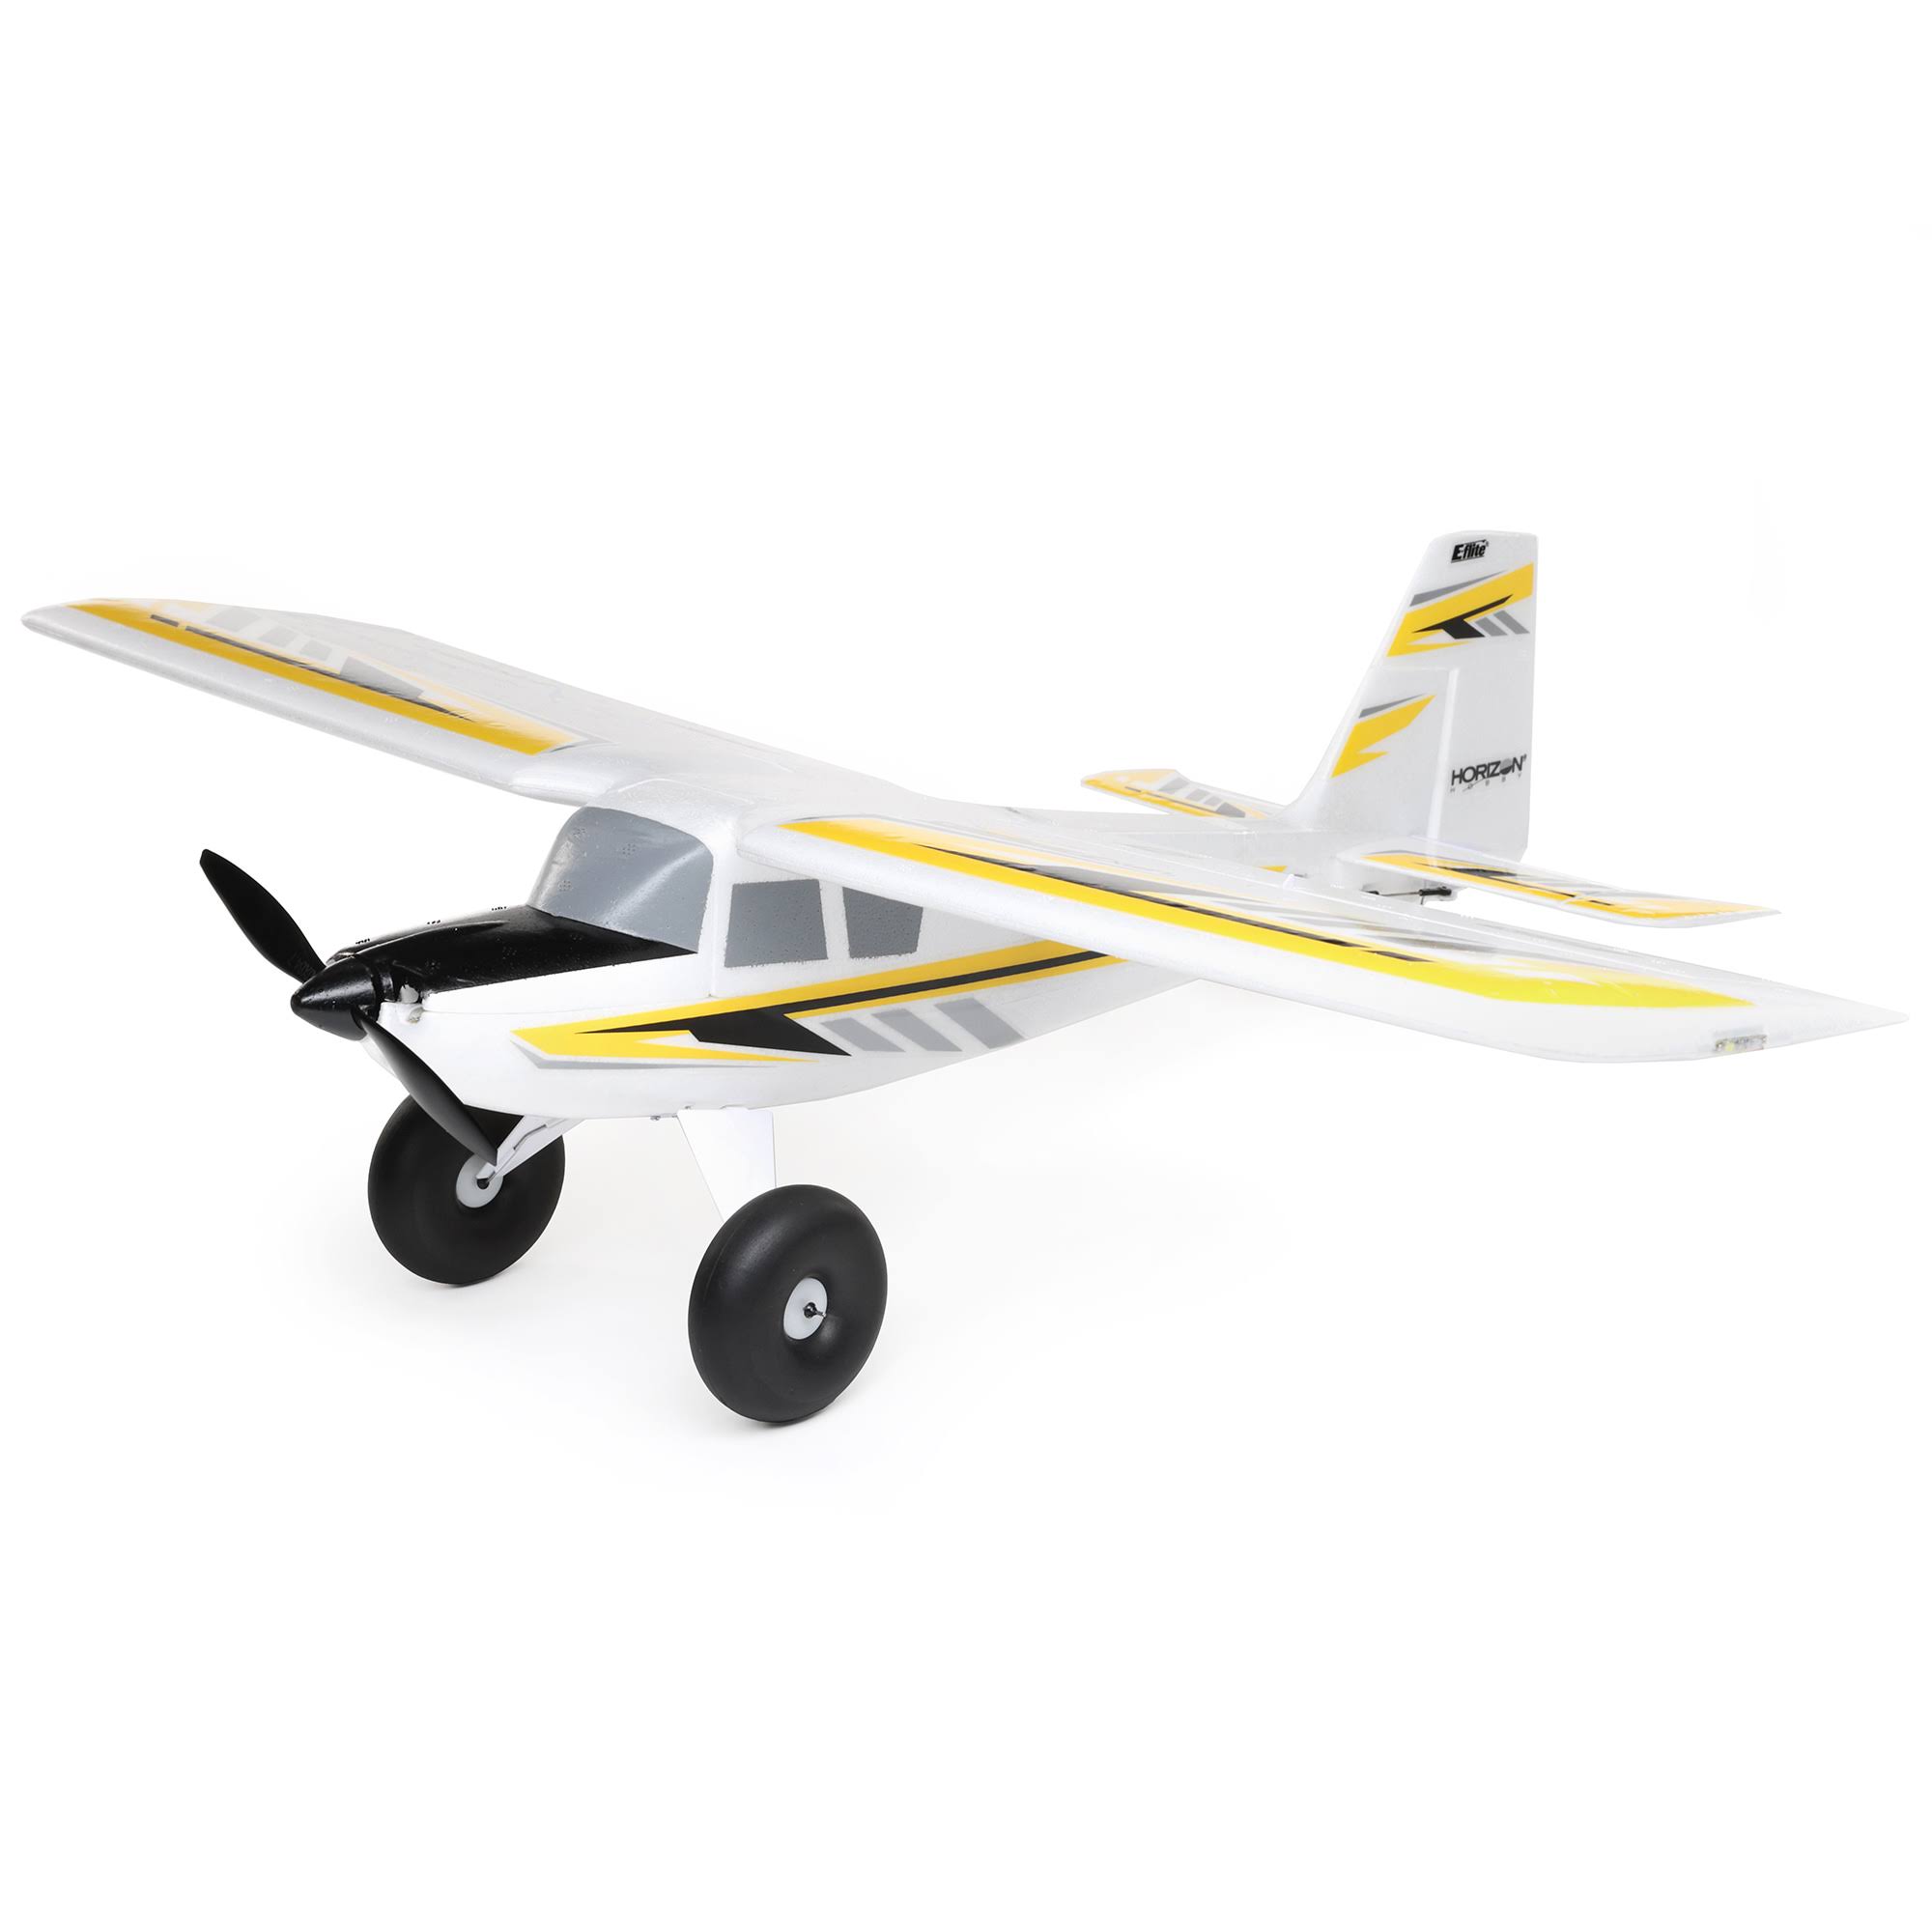 E Flite UMX Timber x BNF Basic with AS3X and Safe Select, 570mm - EFLU7950